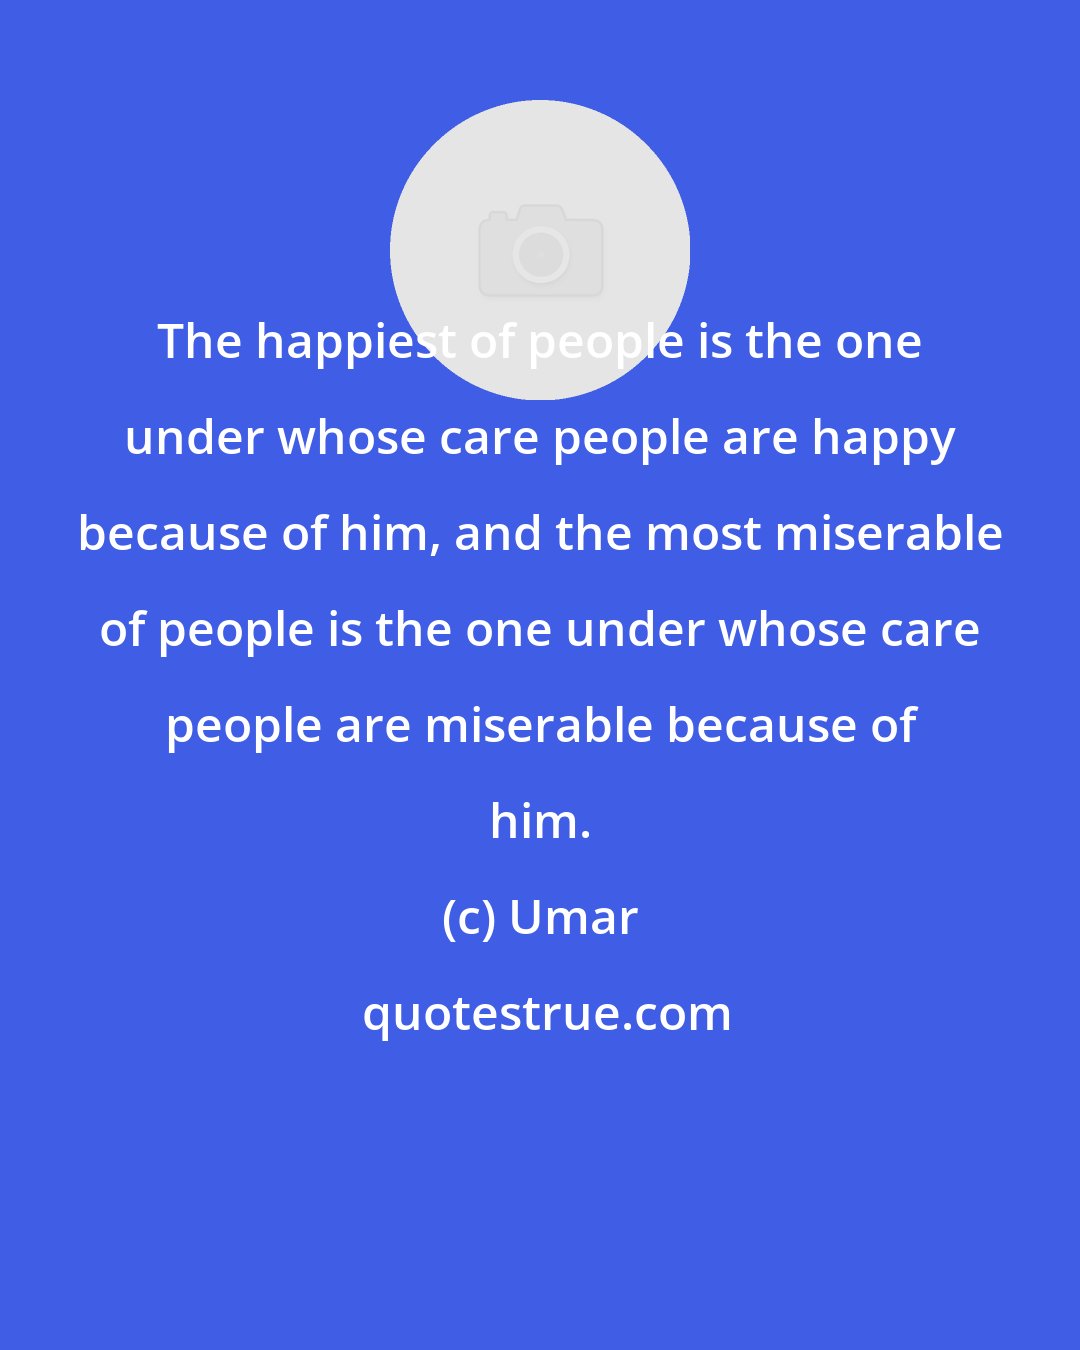 Umar: The happiest of people is the one under whose care people are happy because of him, and the most miserable of people is the one under whose care people are miserable because of him.